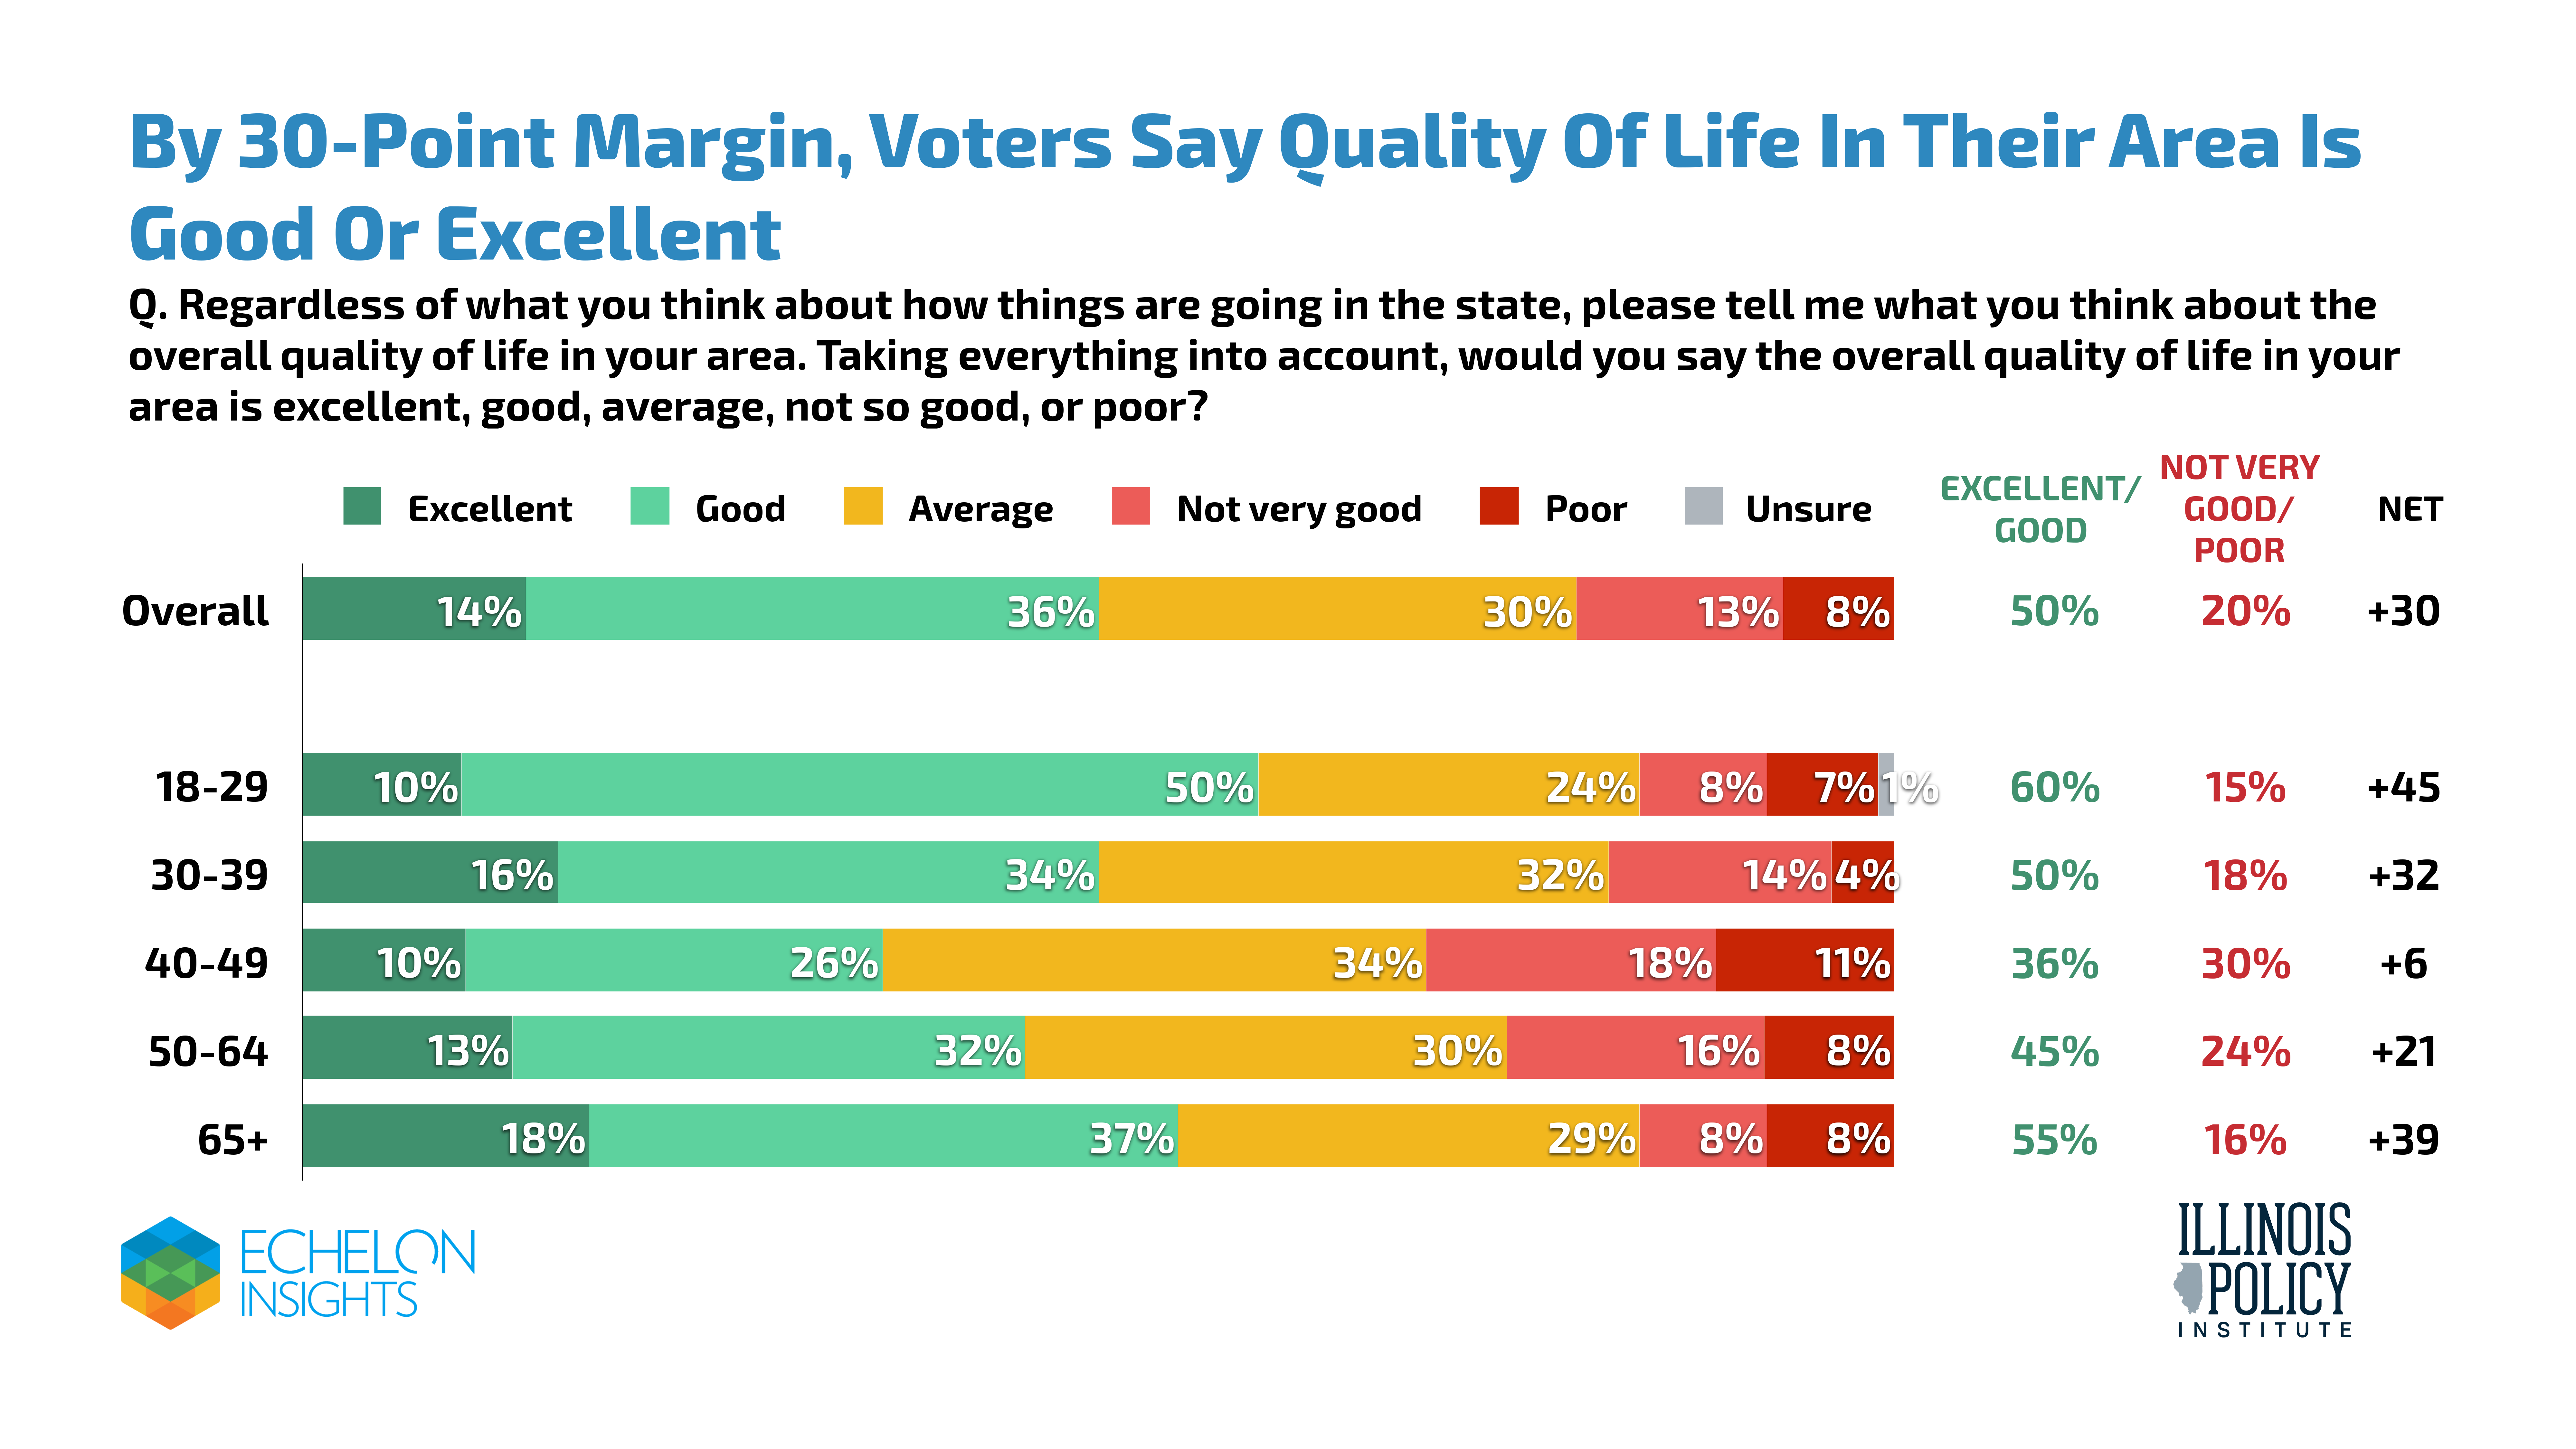 By 30-point margin, voters say quality of life in their area is good or excellent